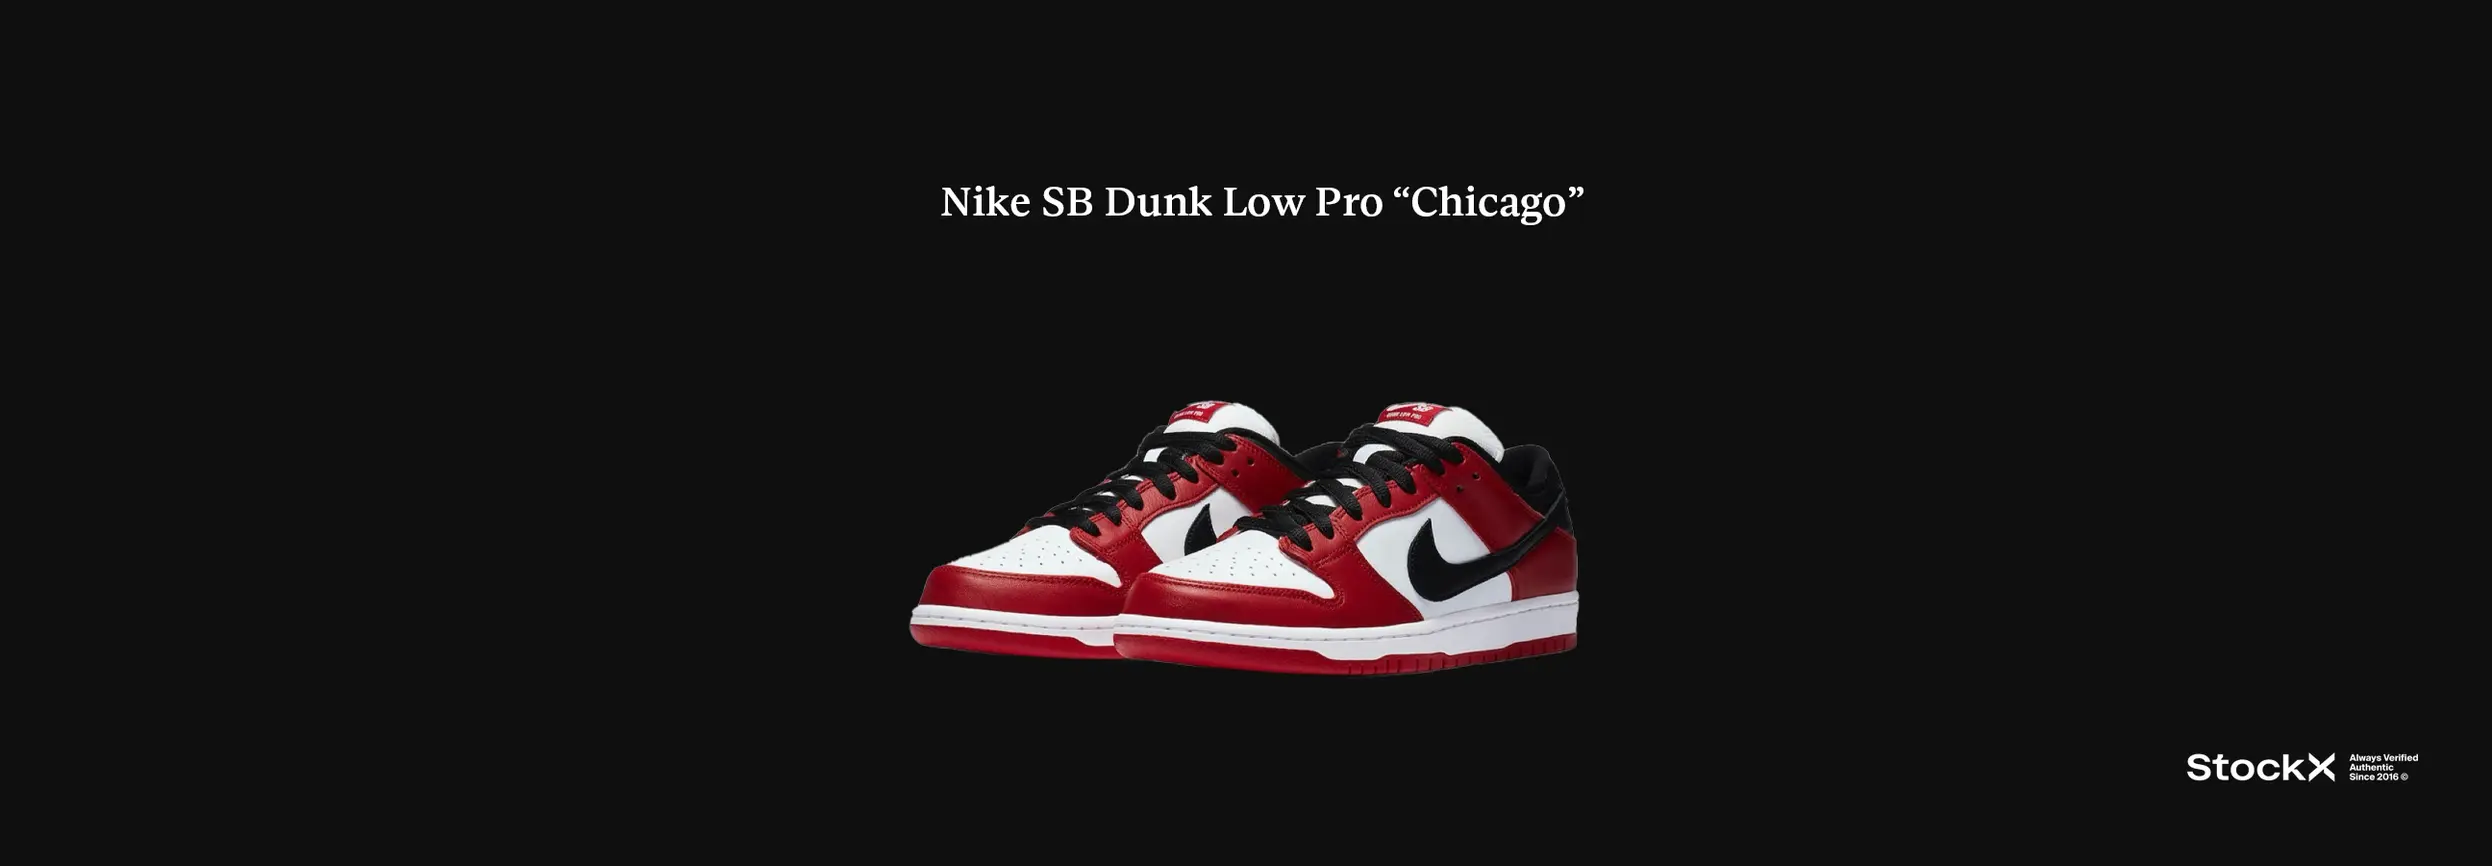 [WEB]Nike_SB_Dunk_Low_Pro_“Chicago”.png